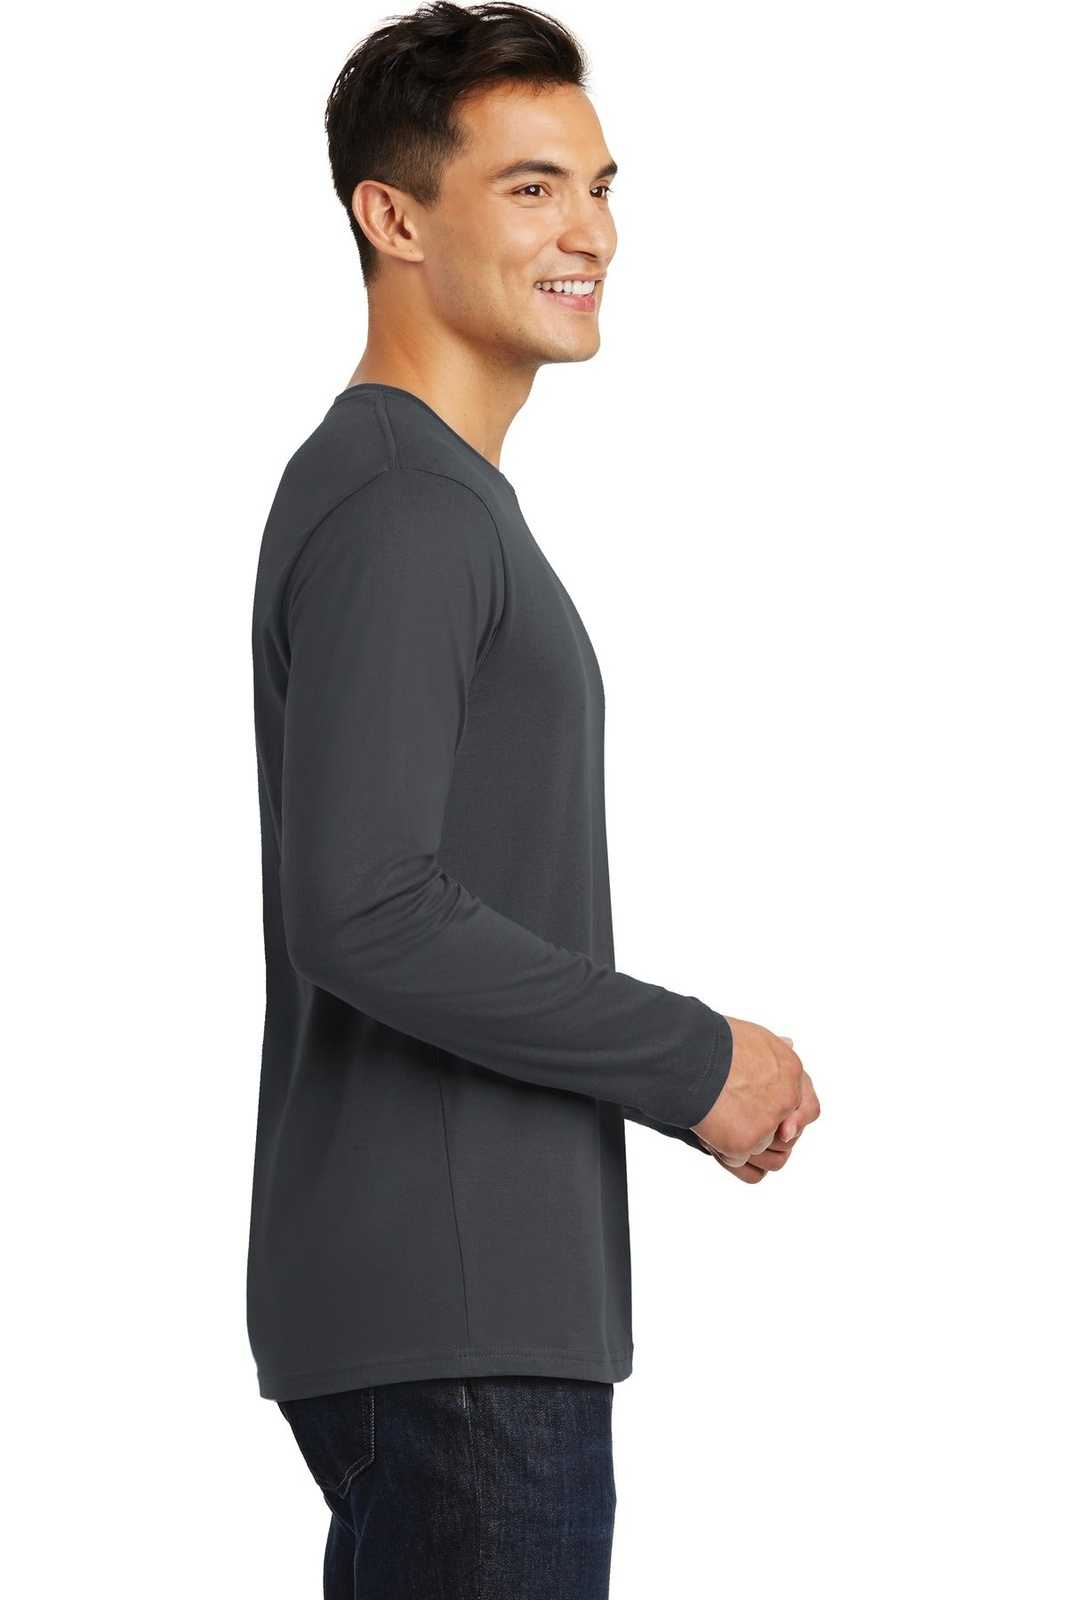 District DT105 Perfect Weight Long Sleeve Tee - Charcoal - HIT a Double - 3